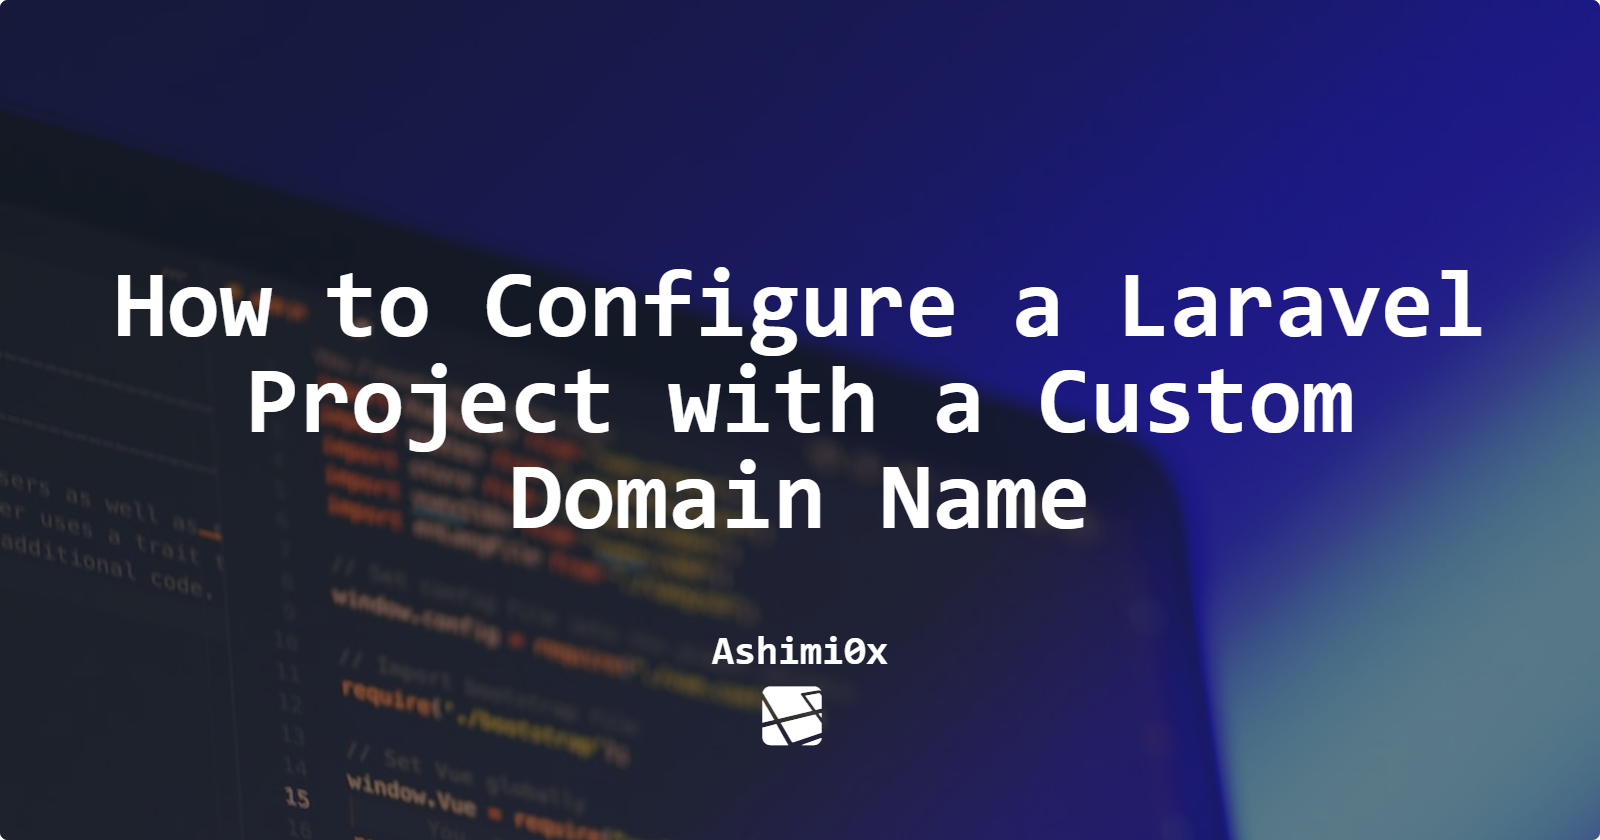 How to Configure a Laravel Project with a Custom Domain Name on Windows with XAMPP